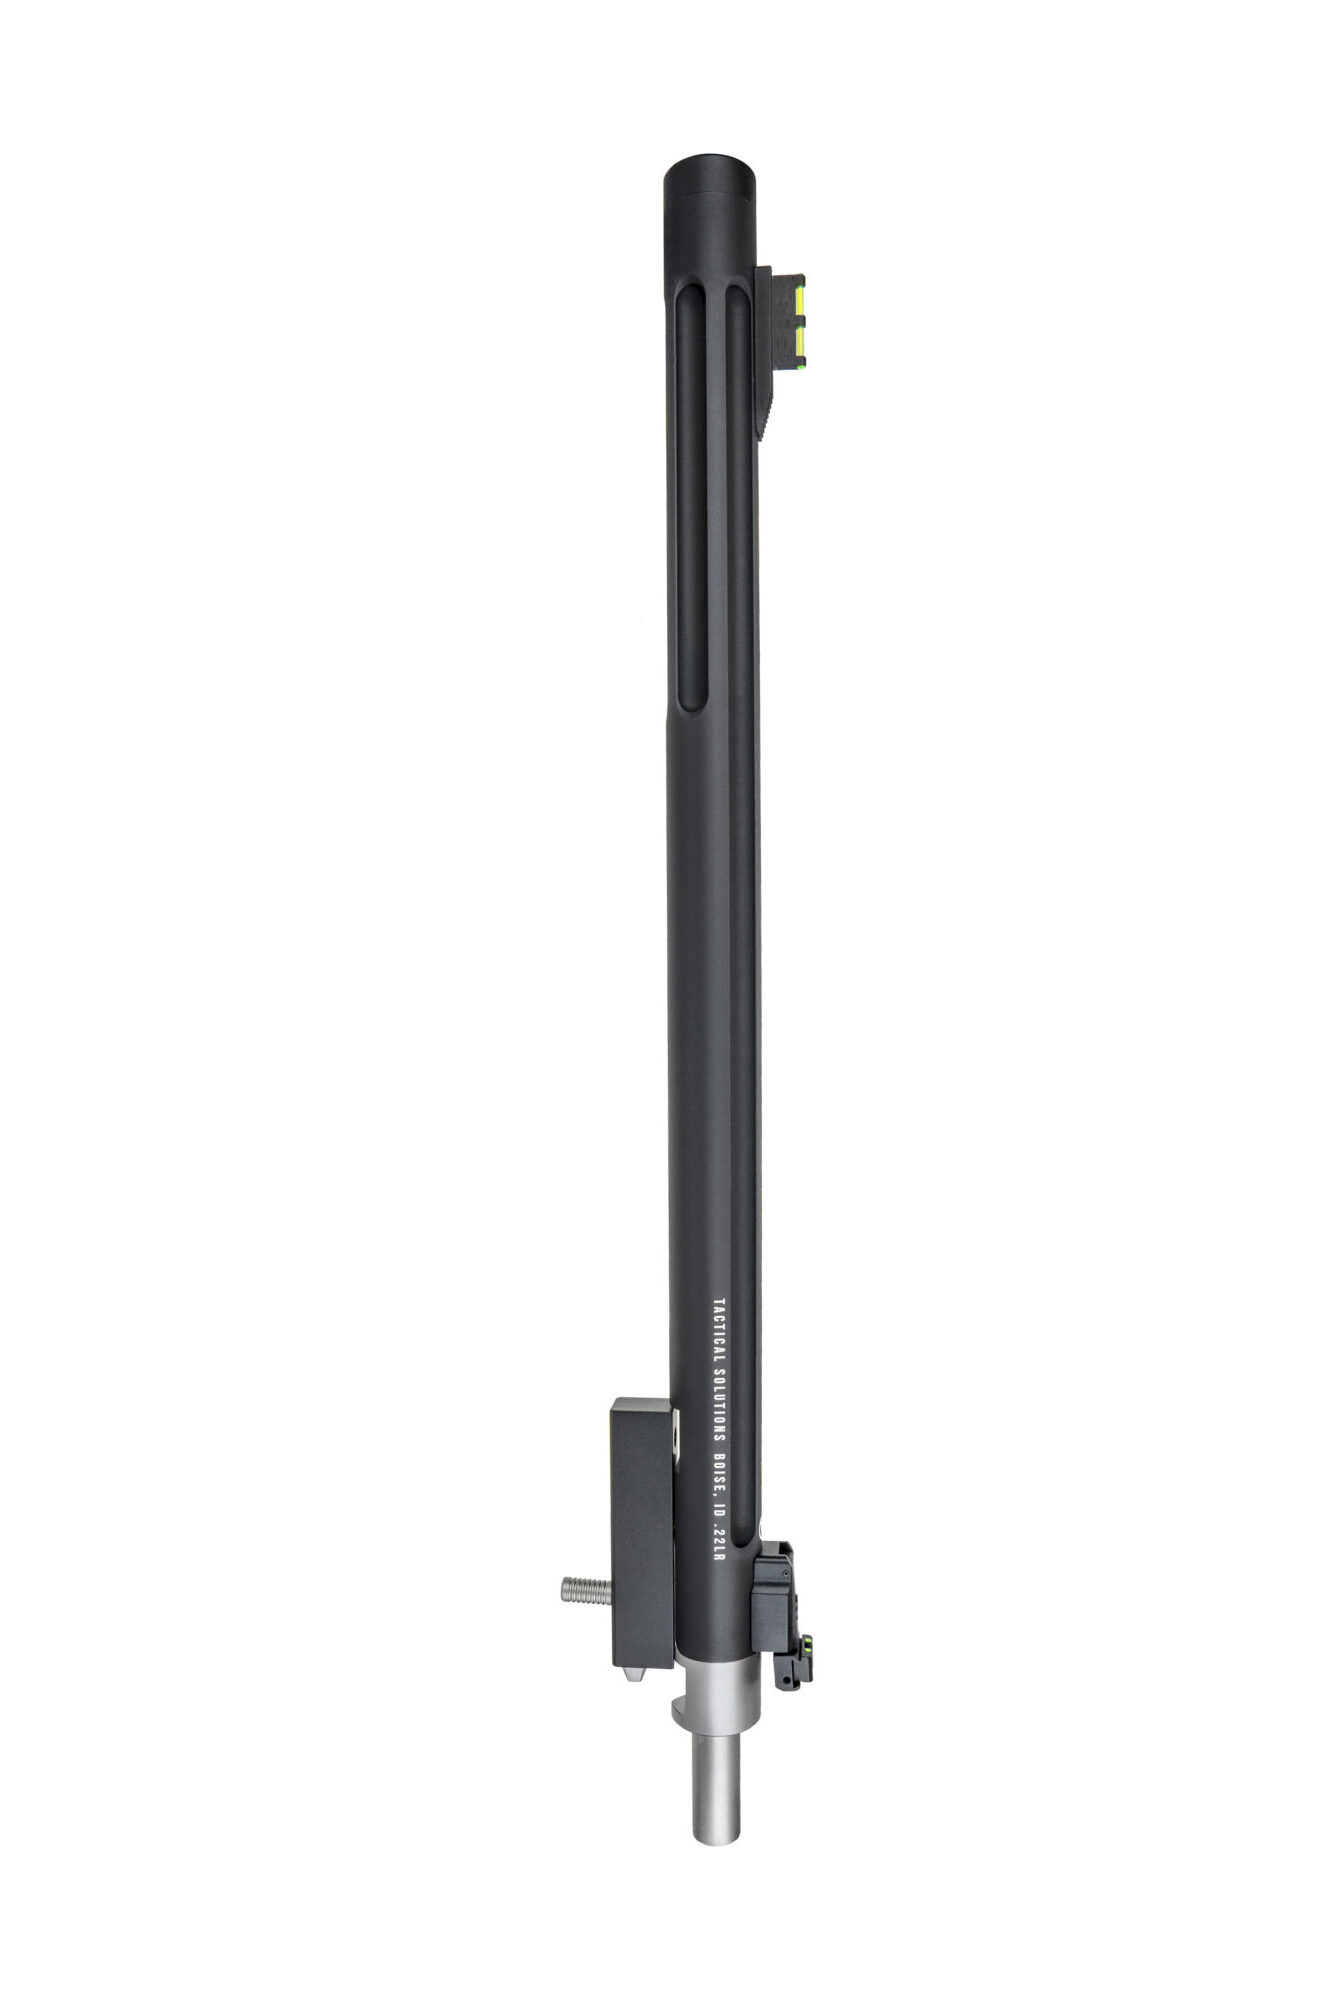 Vertical product image of the MATTE BLACK X-RING TAKEDOWN BARREL FOR RUGER® 10/22 TAKEDOWN® RIFLES